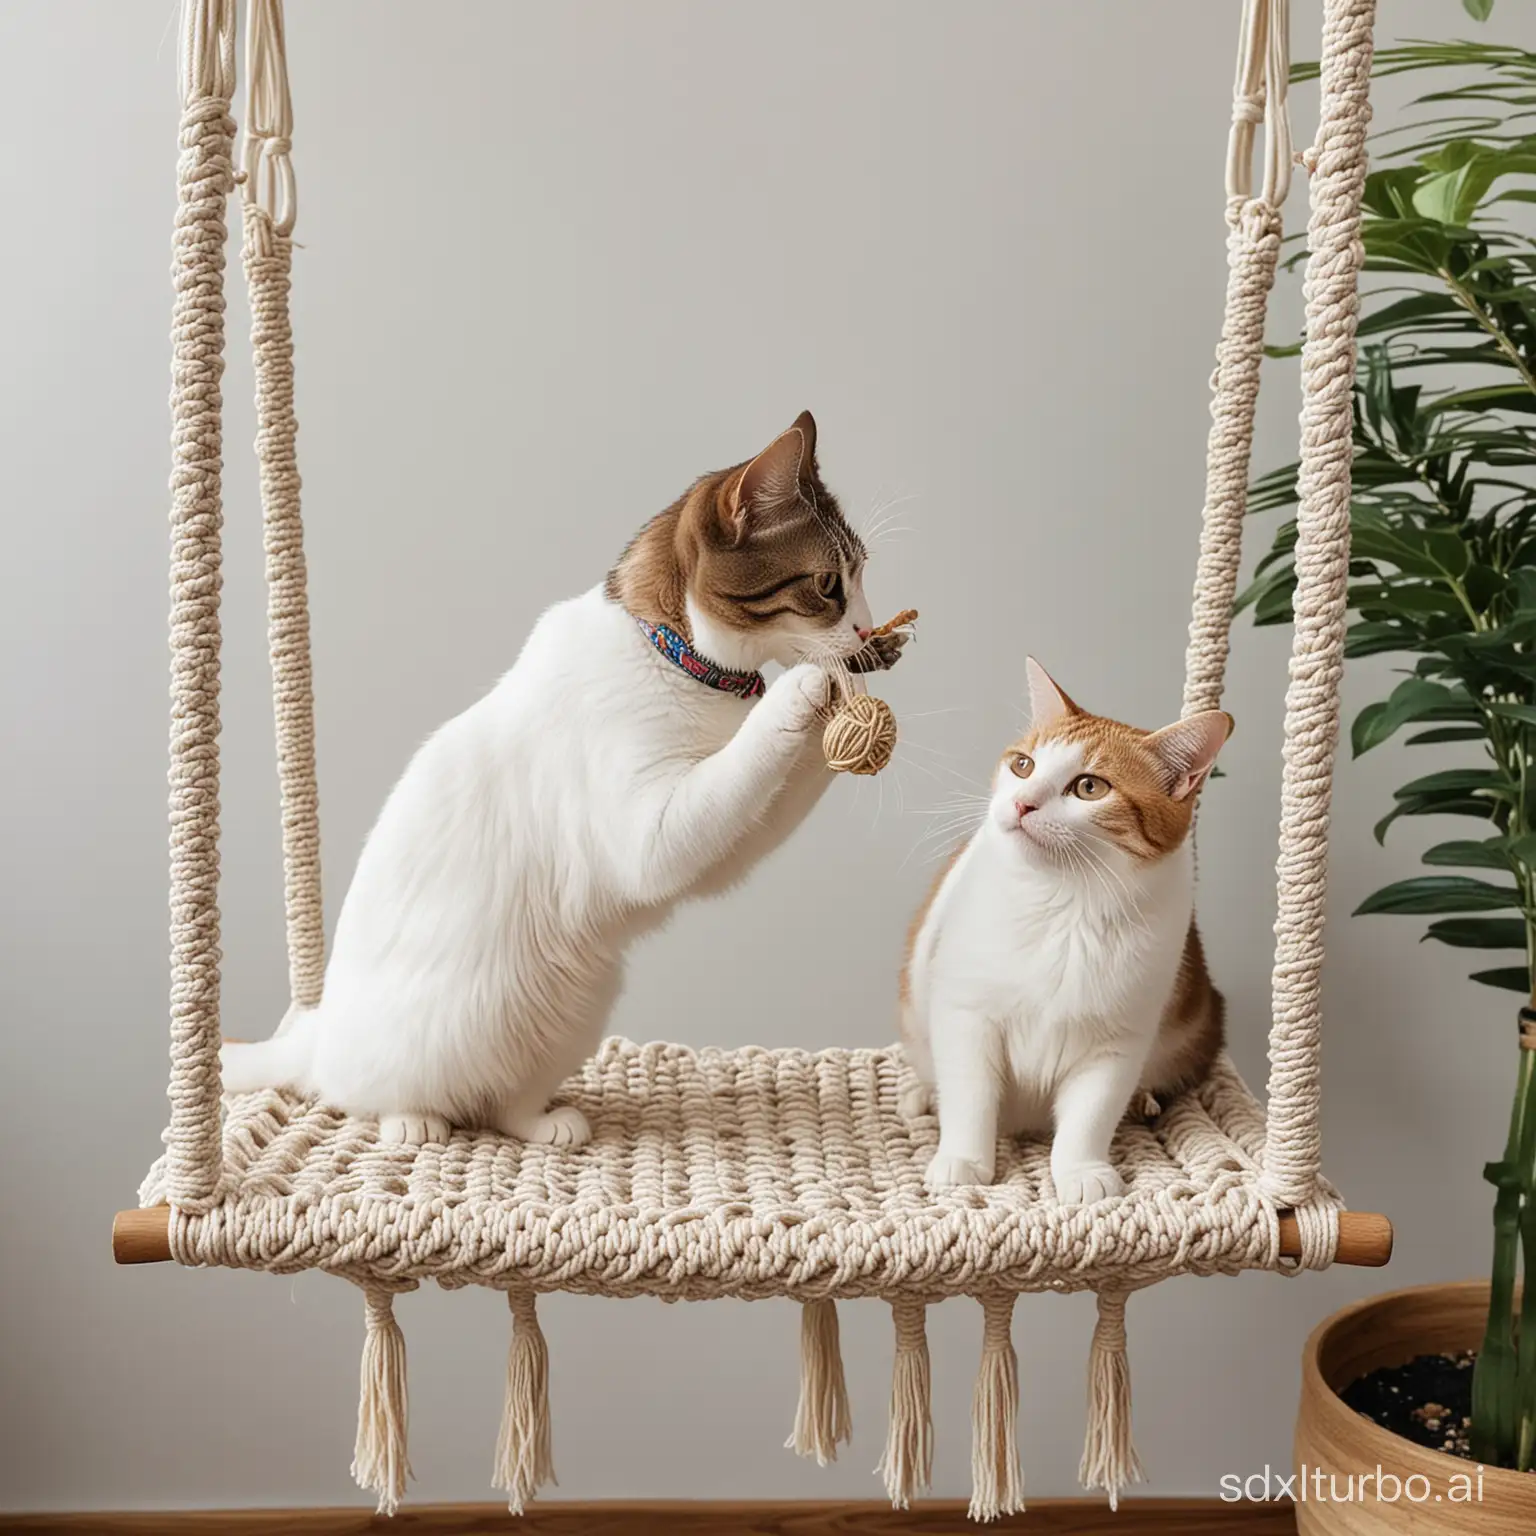 Two-Cats-Engaged-in-Playful-Battle-Over-Macrame-Cat-Swing